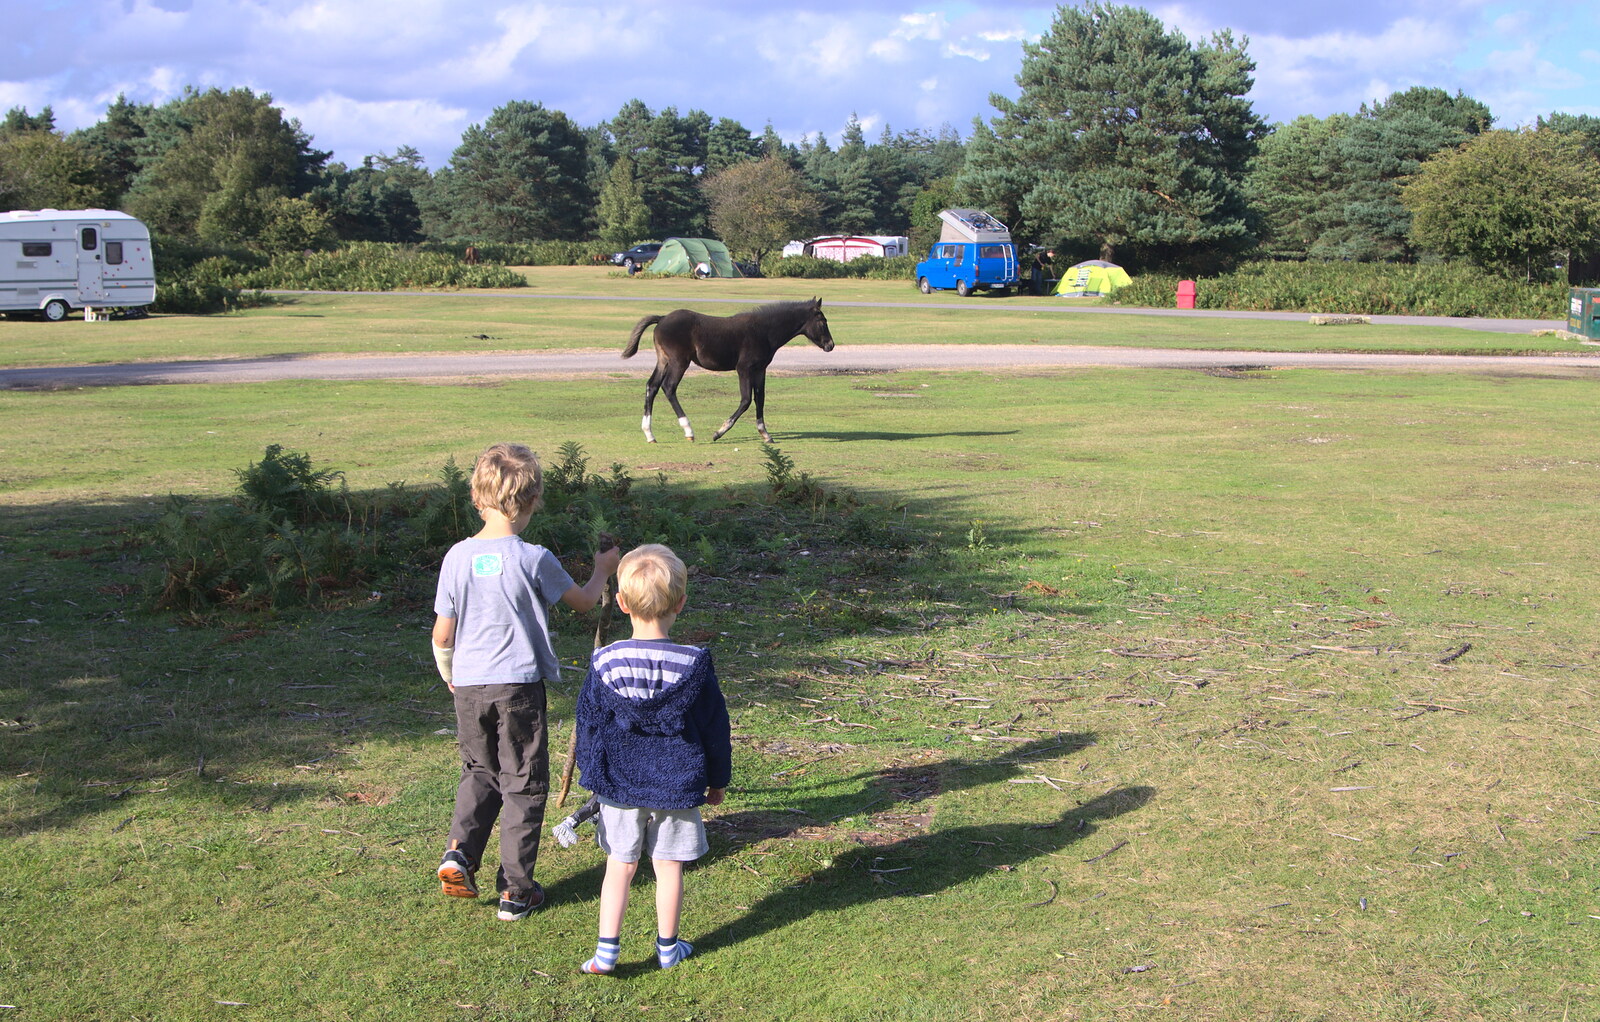 A foal trots past from Camping at Roundhills, Brockenhurst, New Forest, Hampshire - 29th August 2015